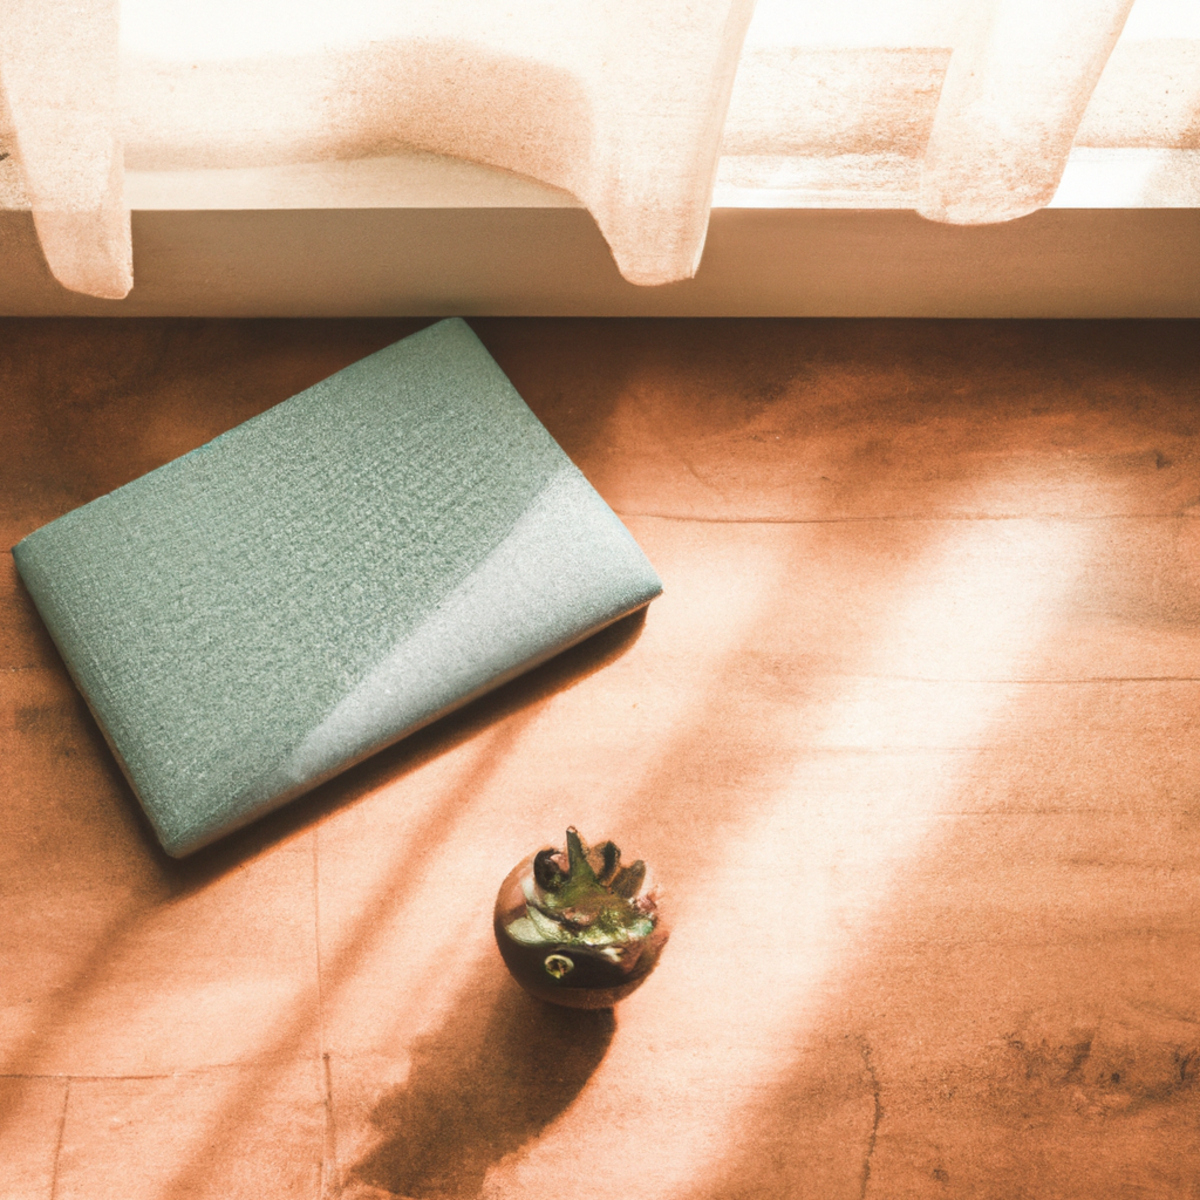 The photo features a serene scene with a yoga mat, a meditation cushion, and a small plant placed on a wooden floor. The soft natural light coming from the window creates a calming atmosphere, inviting the viewer to take a moment to pause and breathe. The muted colors of the objects blend harmoniously, emphasizing the simplicity and peacefulness of the meditation practice. The composition of the photo is balanced, with the yoga mat and cushion placed in the foreground, and the plant adding a touch of nature in the background. Overall, the photo captures the essence of the article, promoting the benefits of meditation as a way to overcome workout burnout.